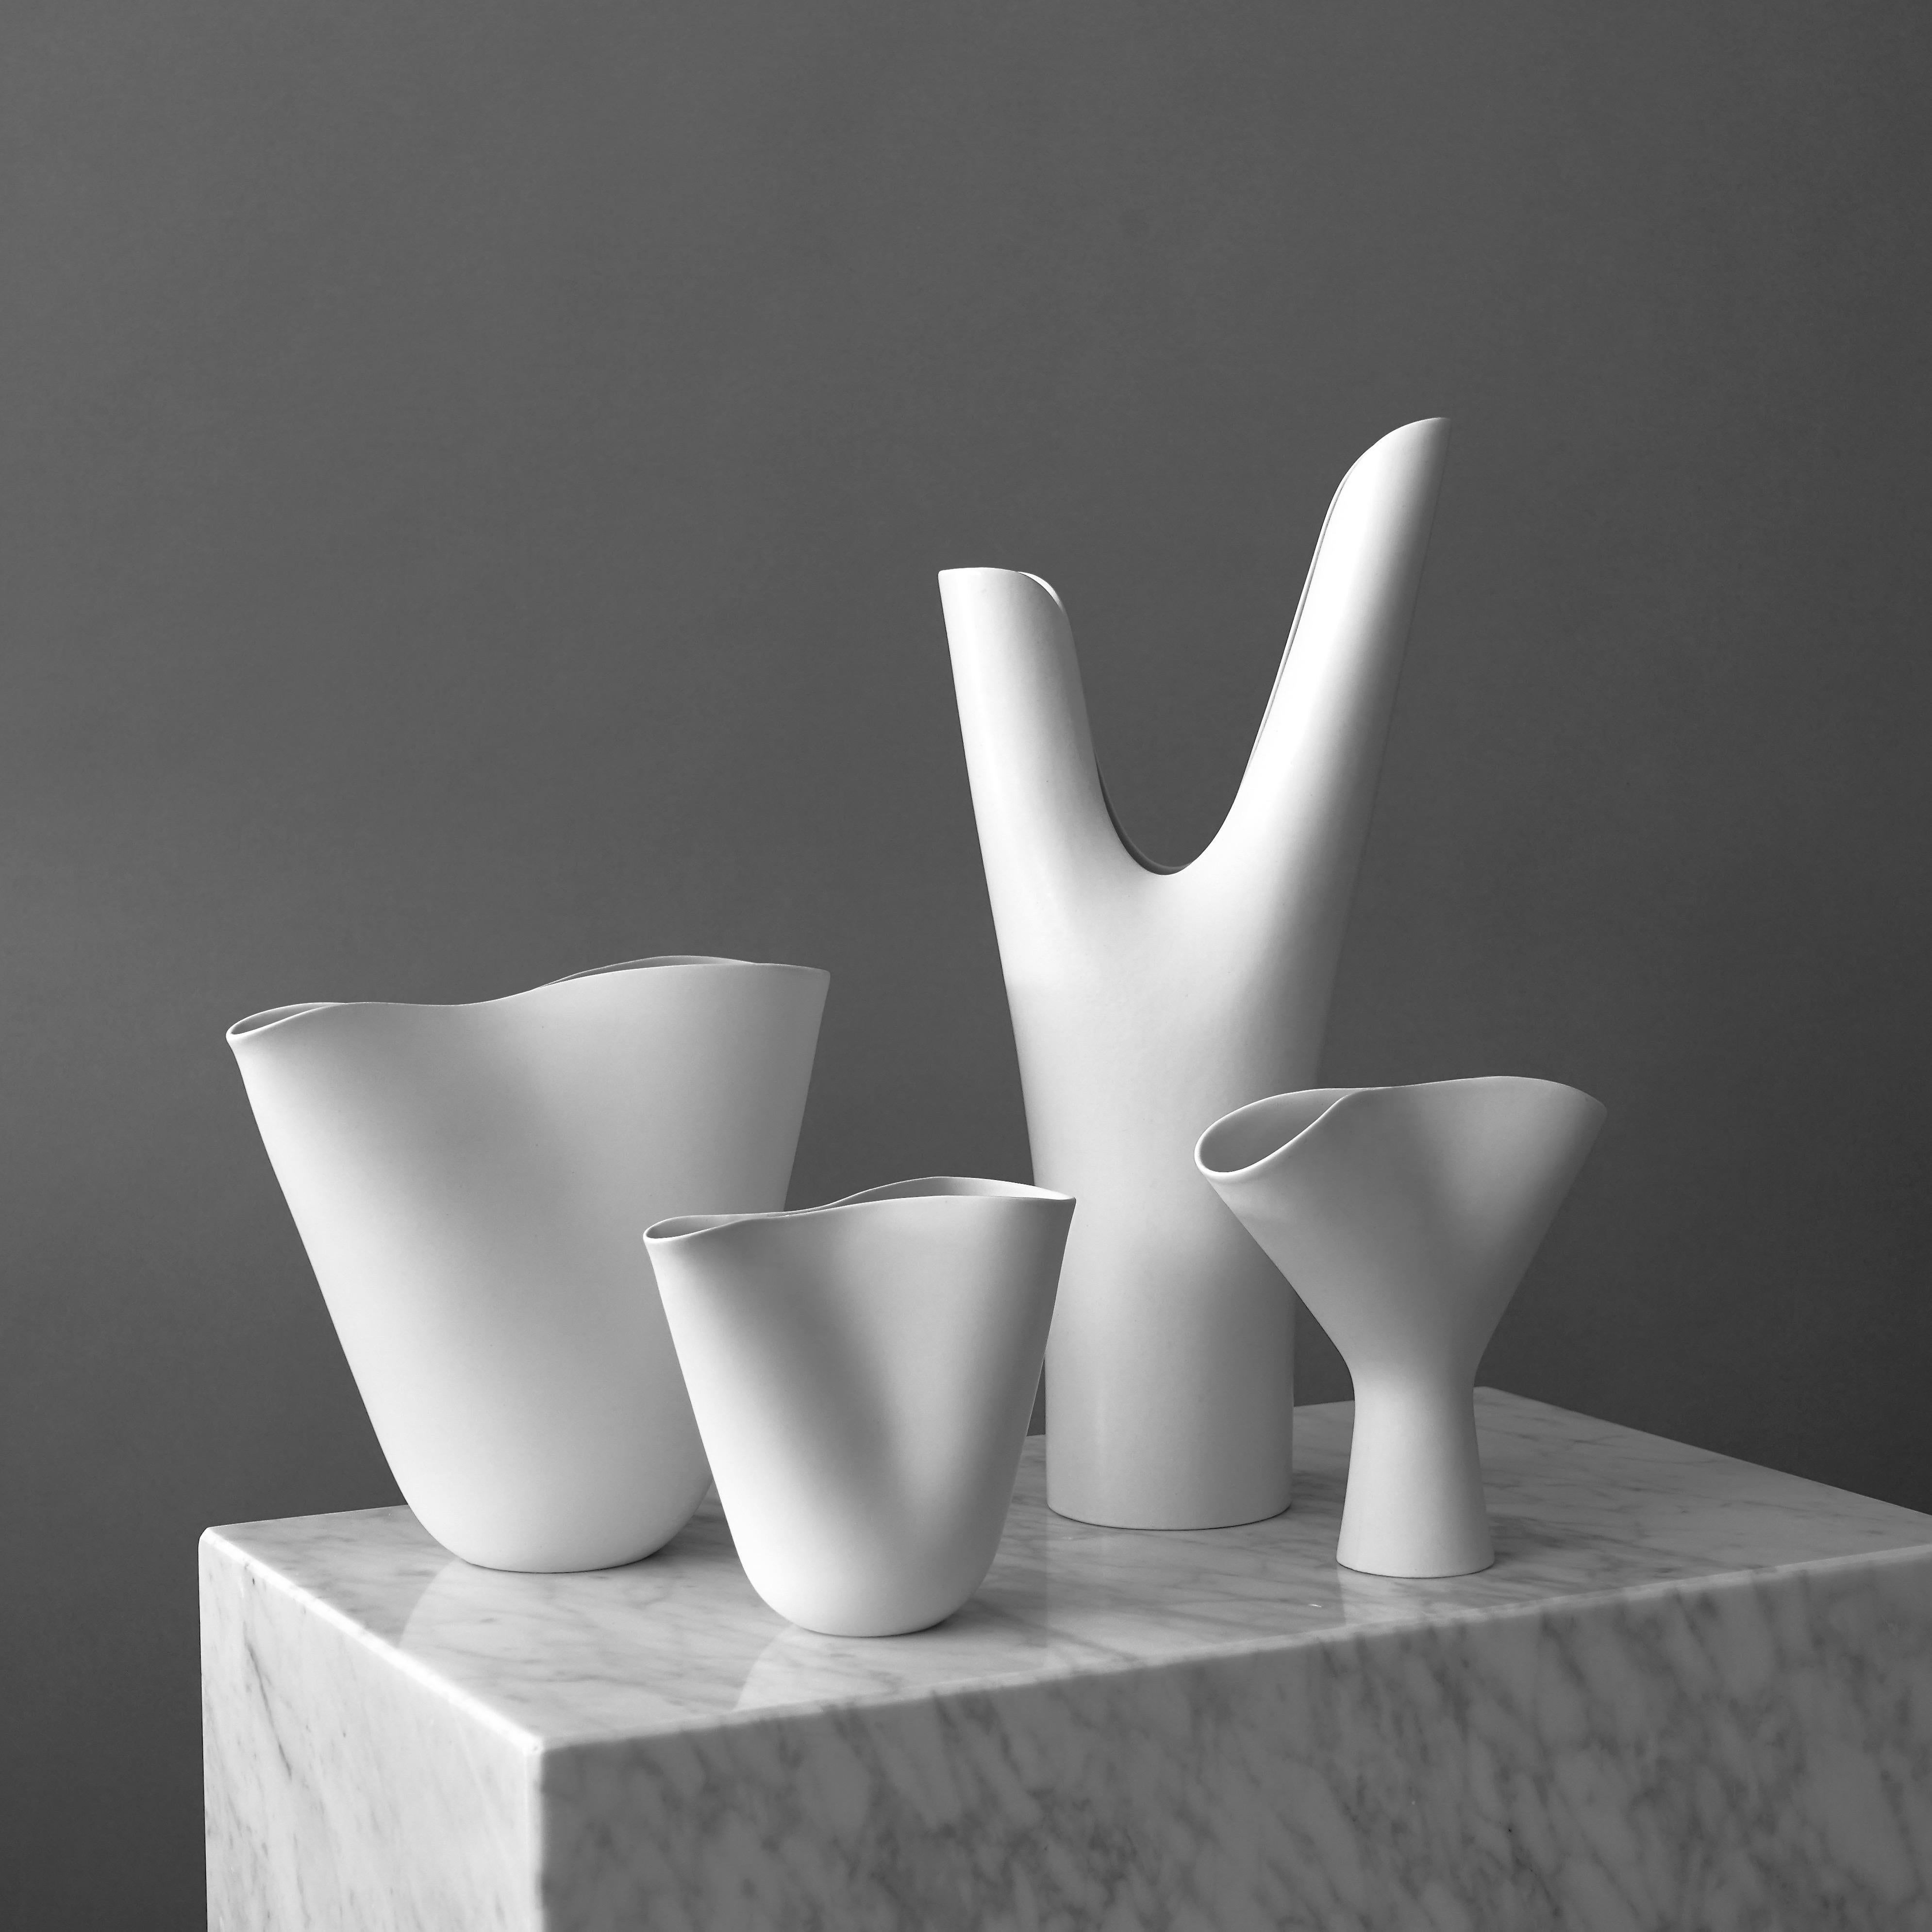 A set of 4 beautiful 'Veckla' vases.
Made by Stig Lindberg in Gustavsberg Studio, Sweden, 1950s.

Excellent condition.
Impressed Gustavsberg studio hand.
The largest vase is 36 cm tall (14.2 in.).

Stig Lindberg’s “Veckla” vases belong to a series